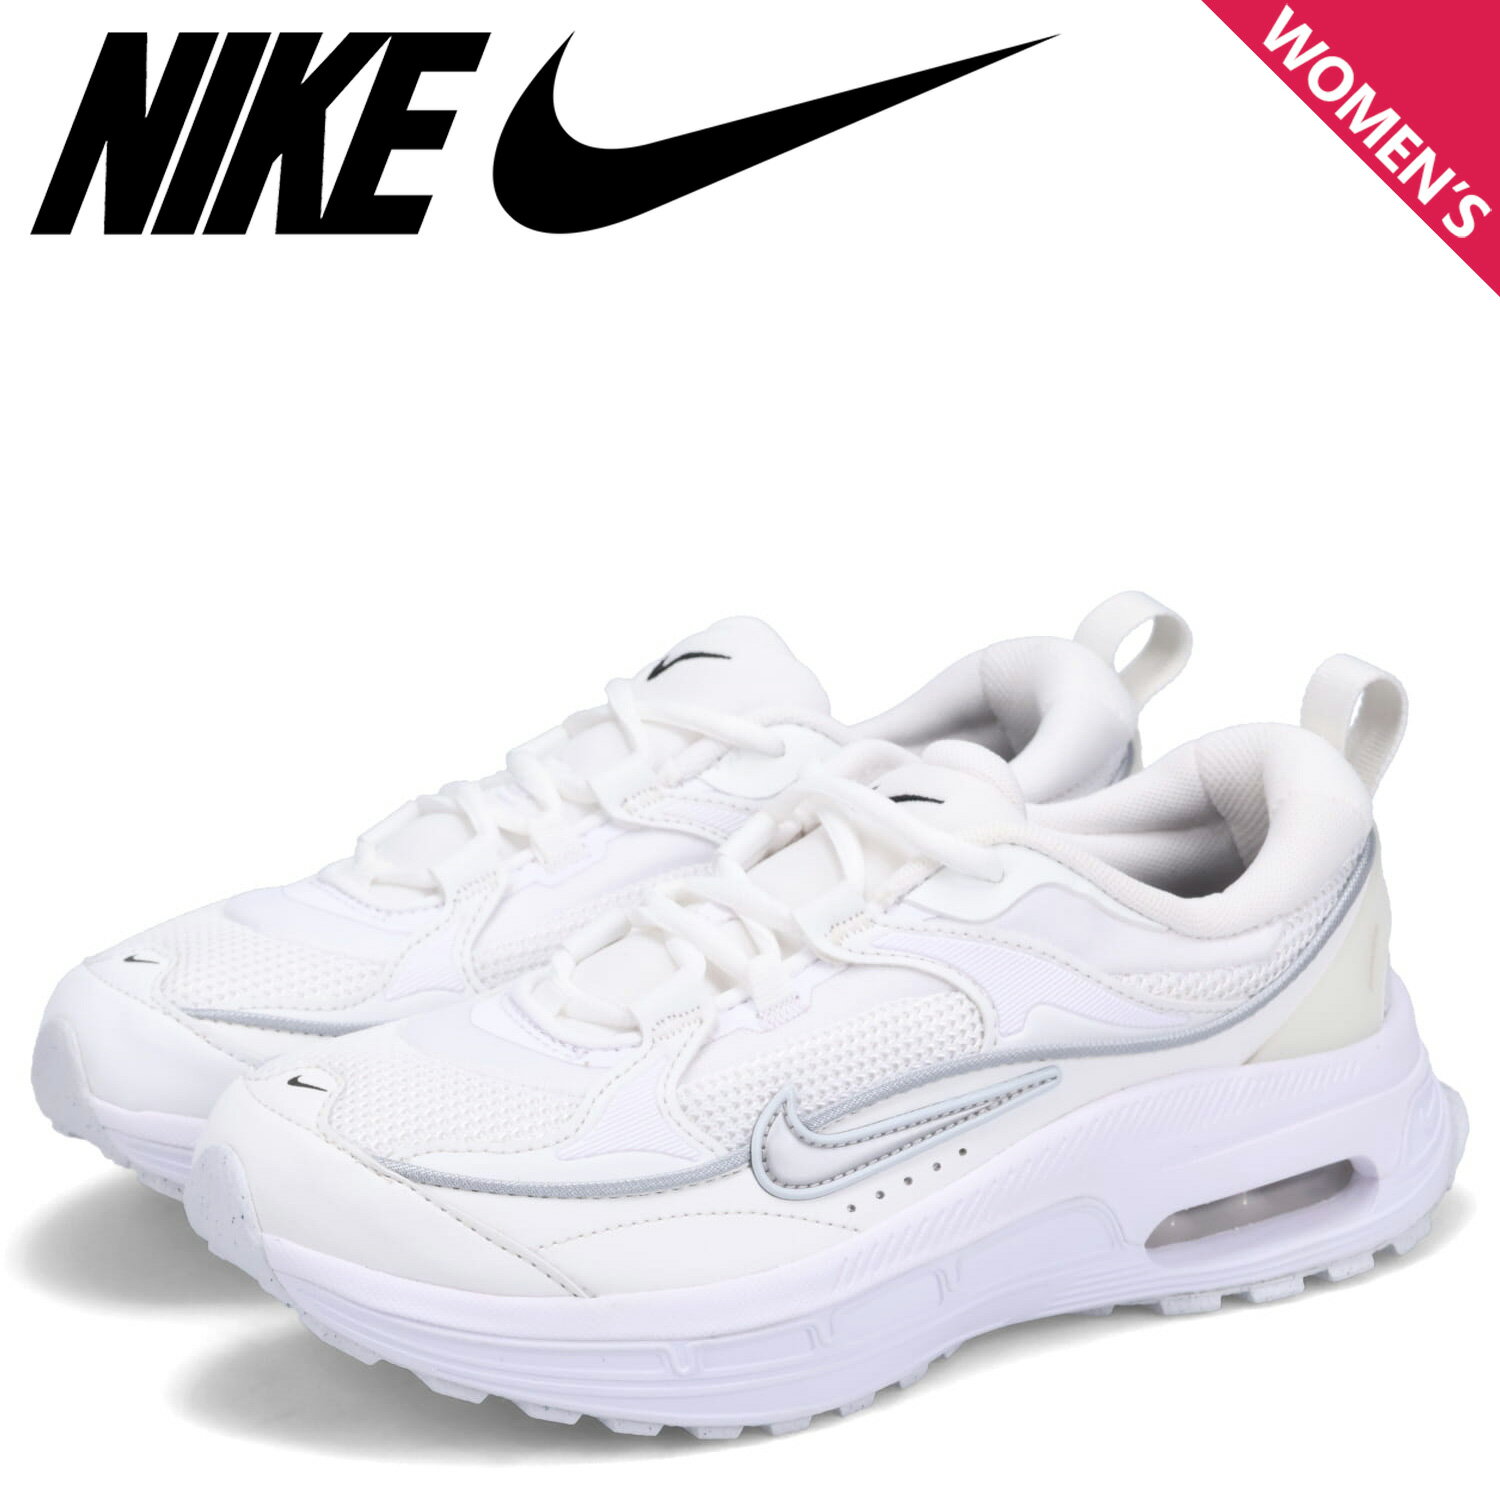 ں1000OFFݥۥʥ NIKE ޥå ֥ꥹ ˡ ǥ WMNS AIR MAX BLISS ۥ磻  DH5128-101